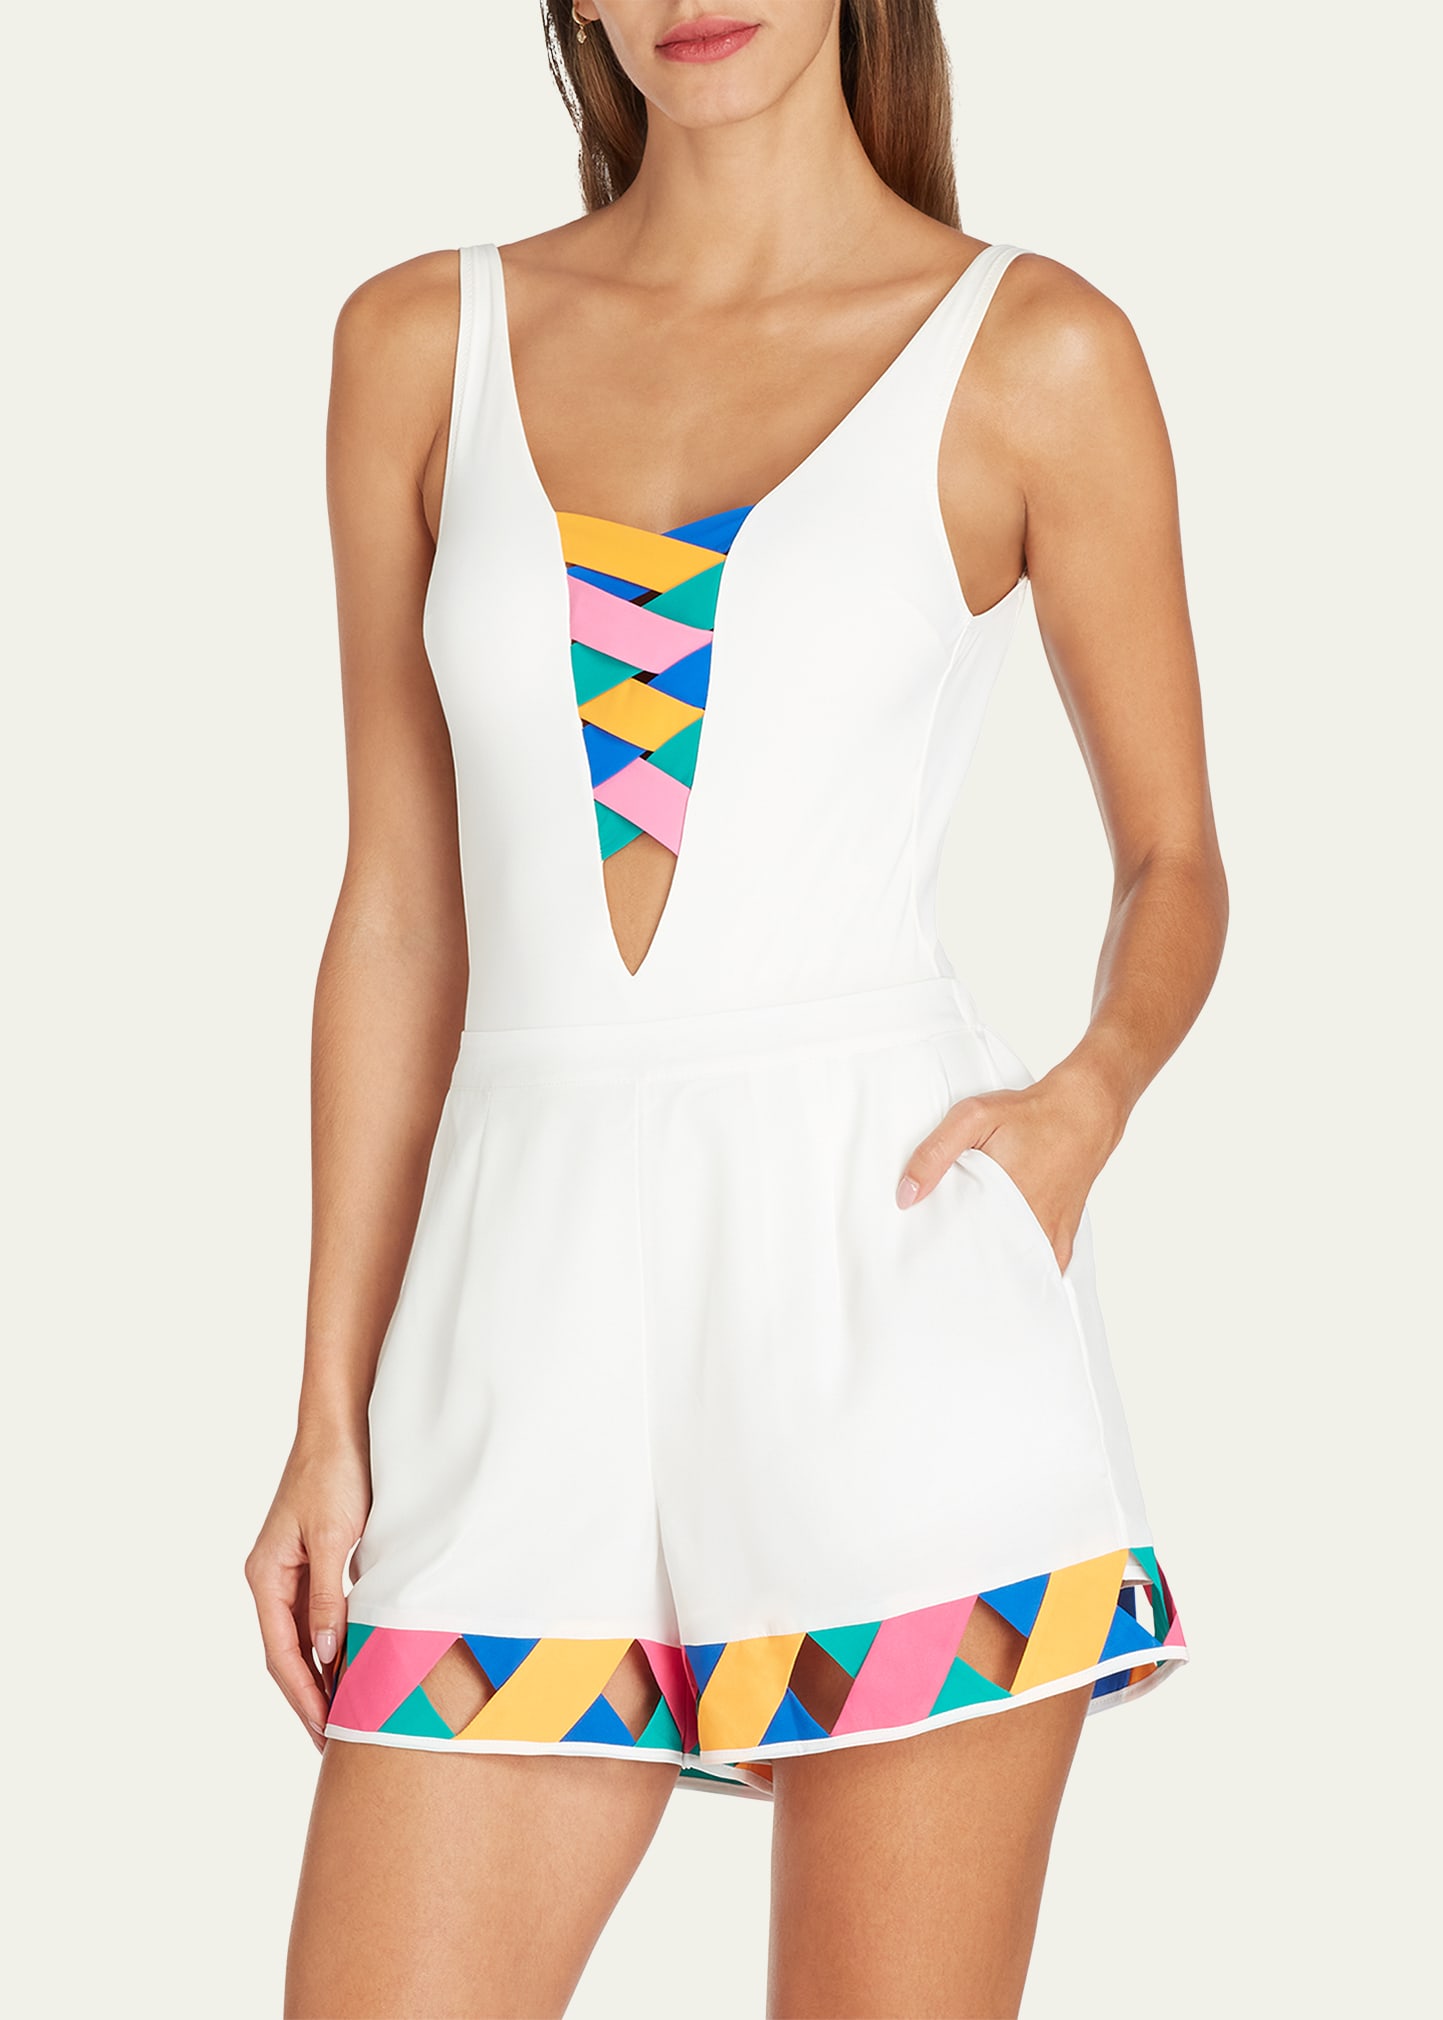 Valimare St Martin Bandage One-piece Swimsuit In Off White